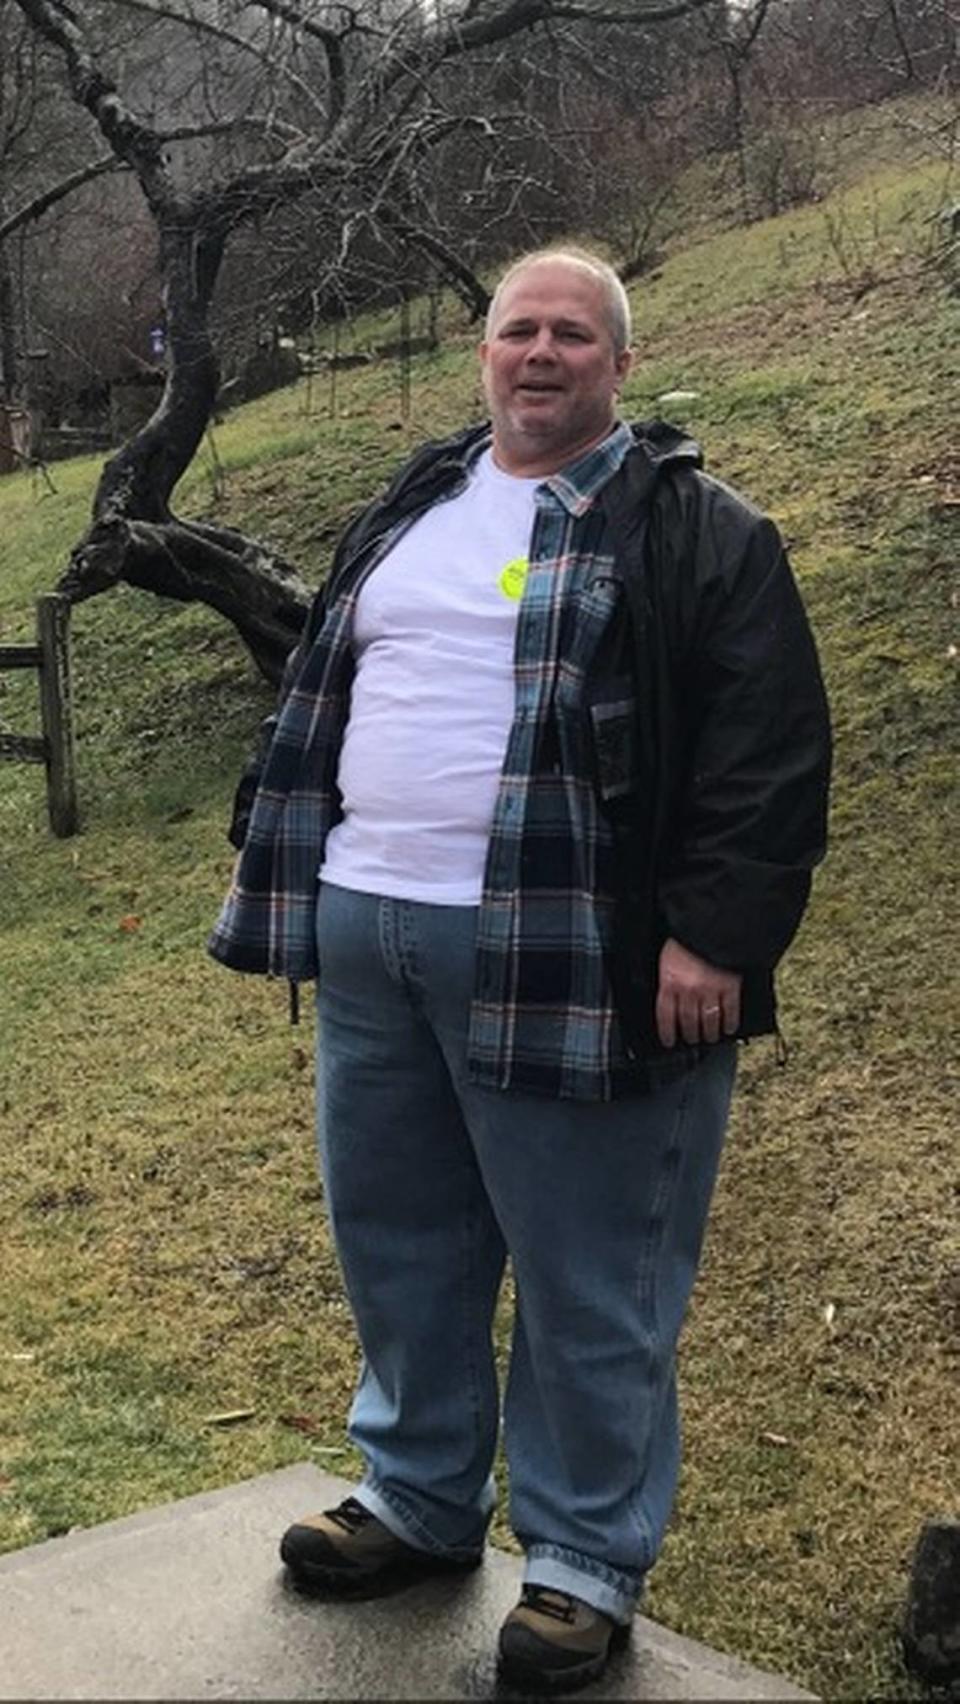 Mario Farnesi at his heaviest weight — 392 pounds, before his bariatric surgery at Jackson Memorial Hospital. After the surgery, he lost more than 150 pounds.